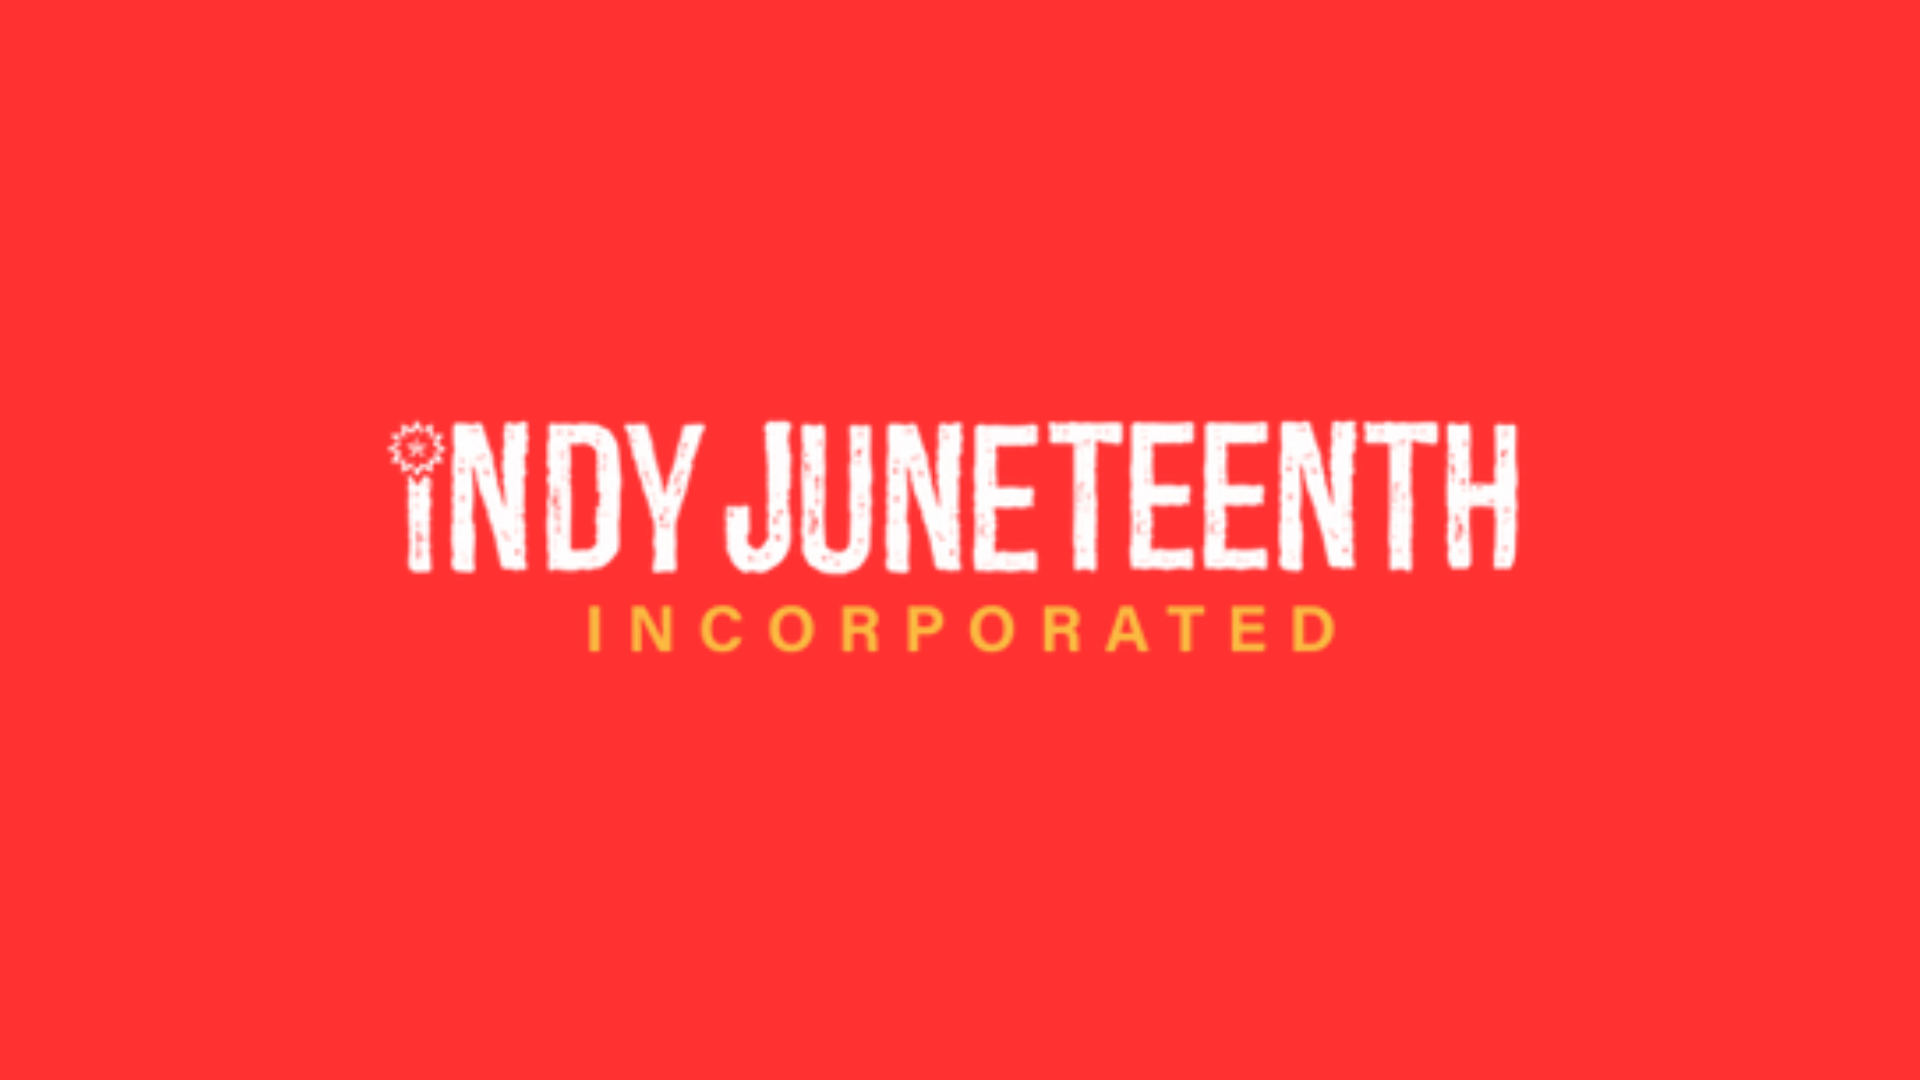 Indy Juneteenth